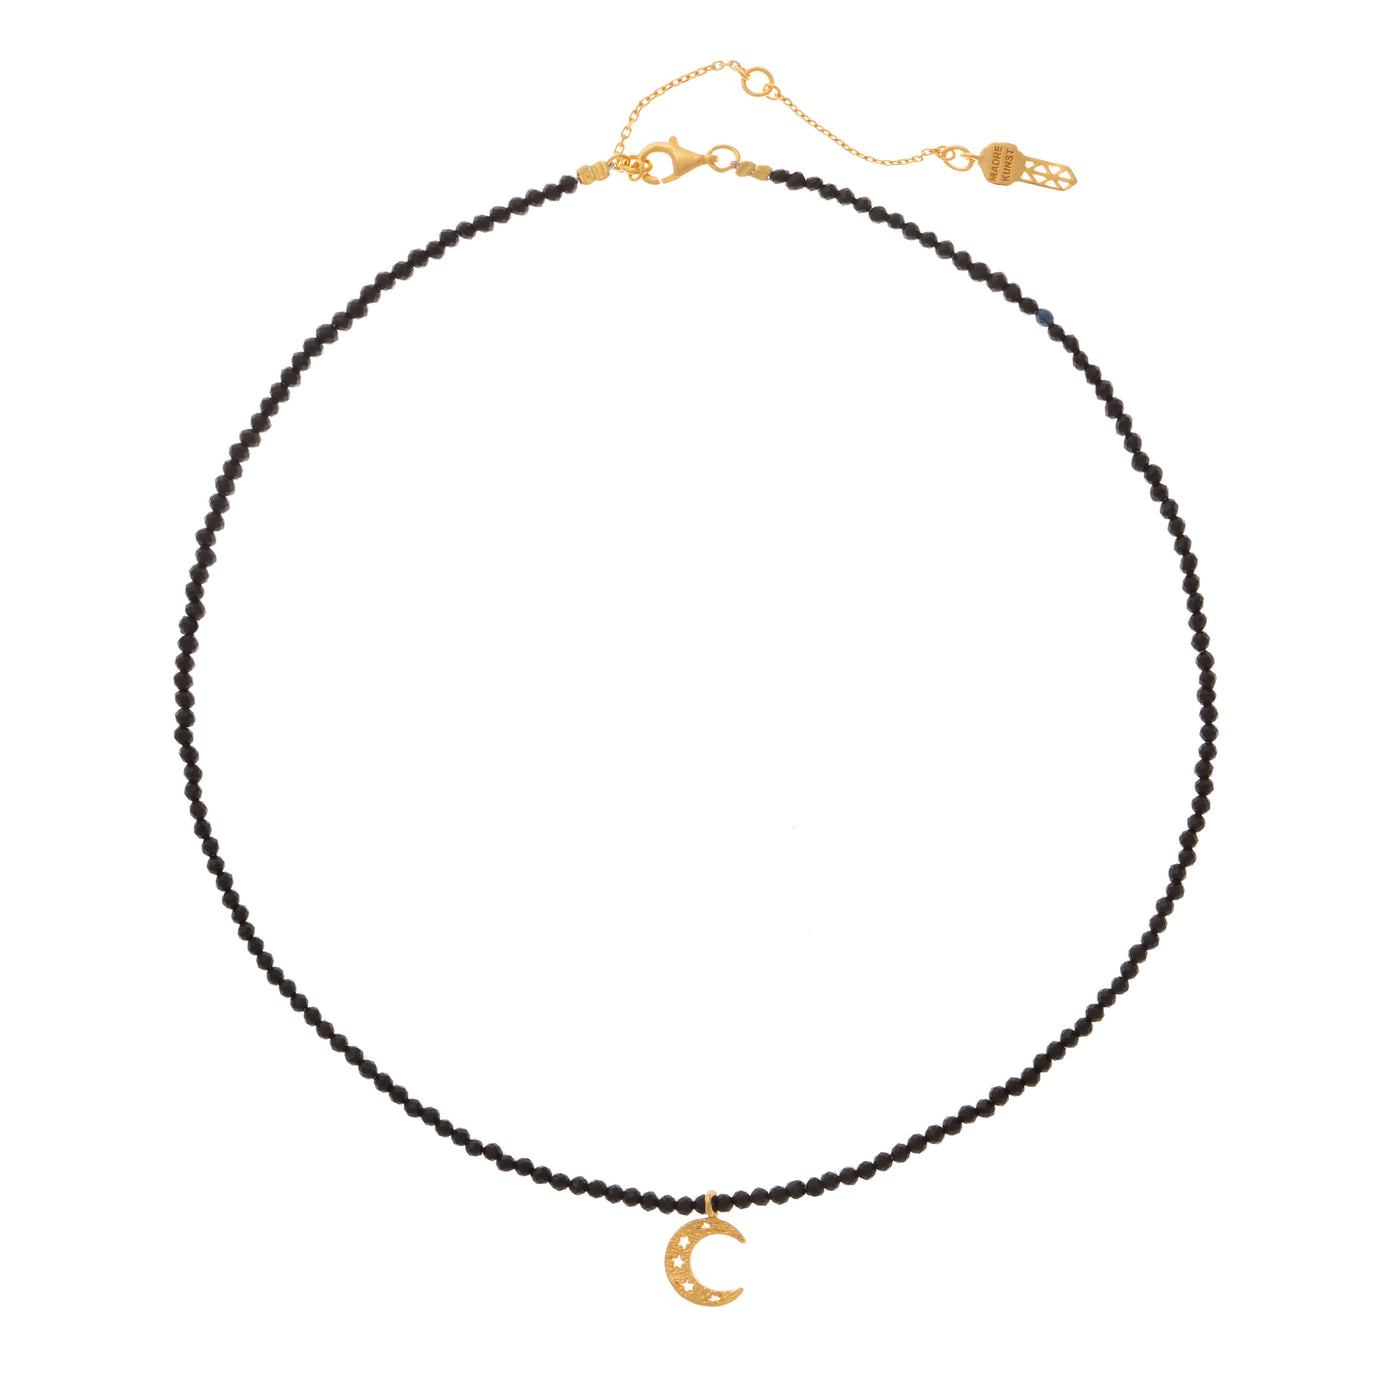 Moon black spinel choker. Silver, gold-plated